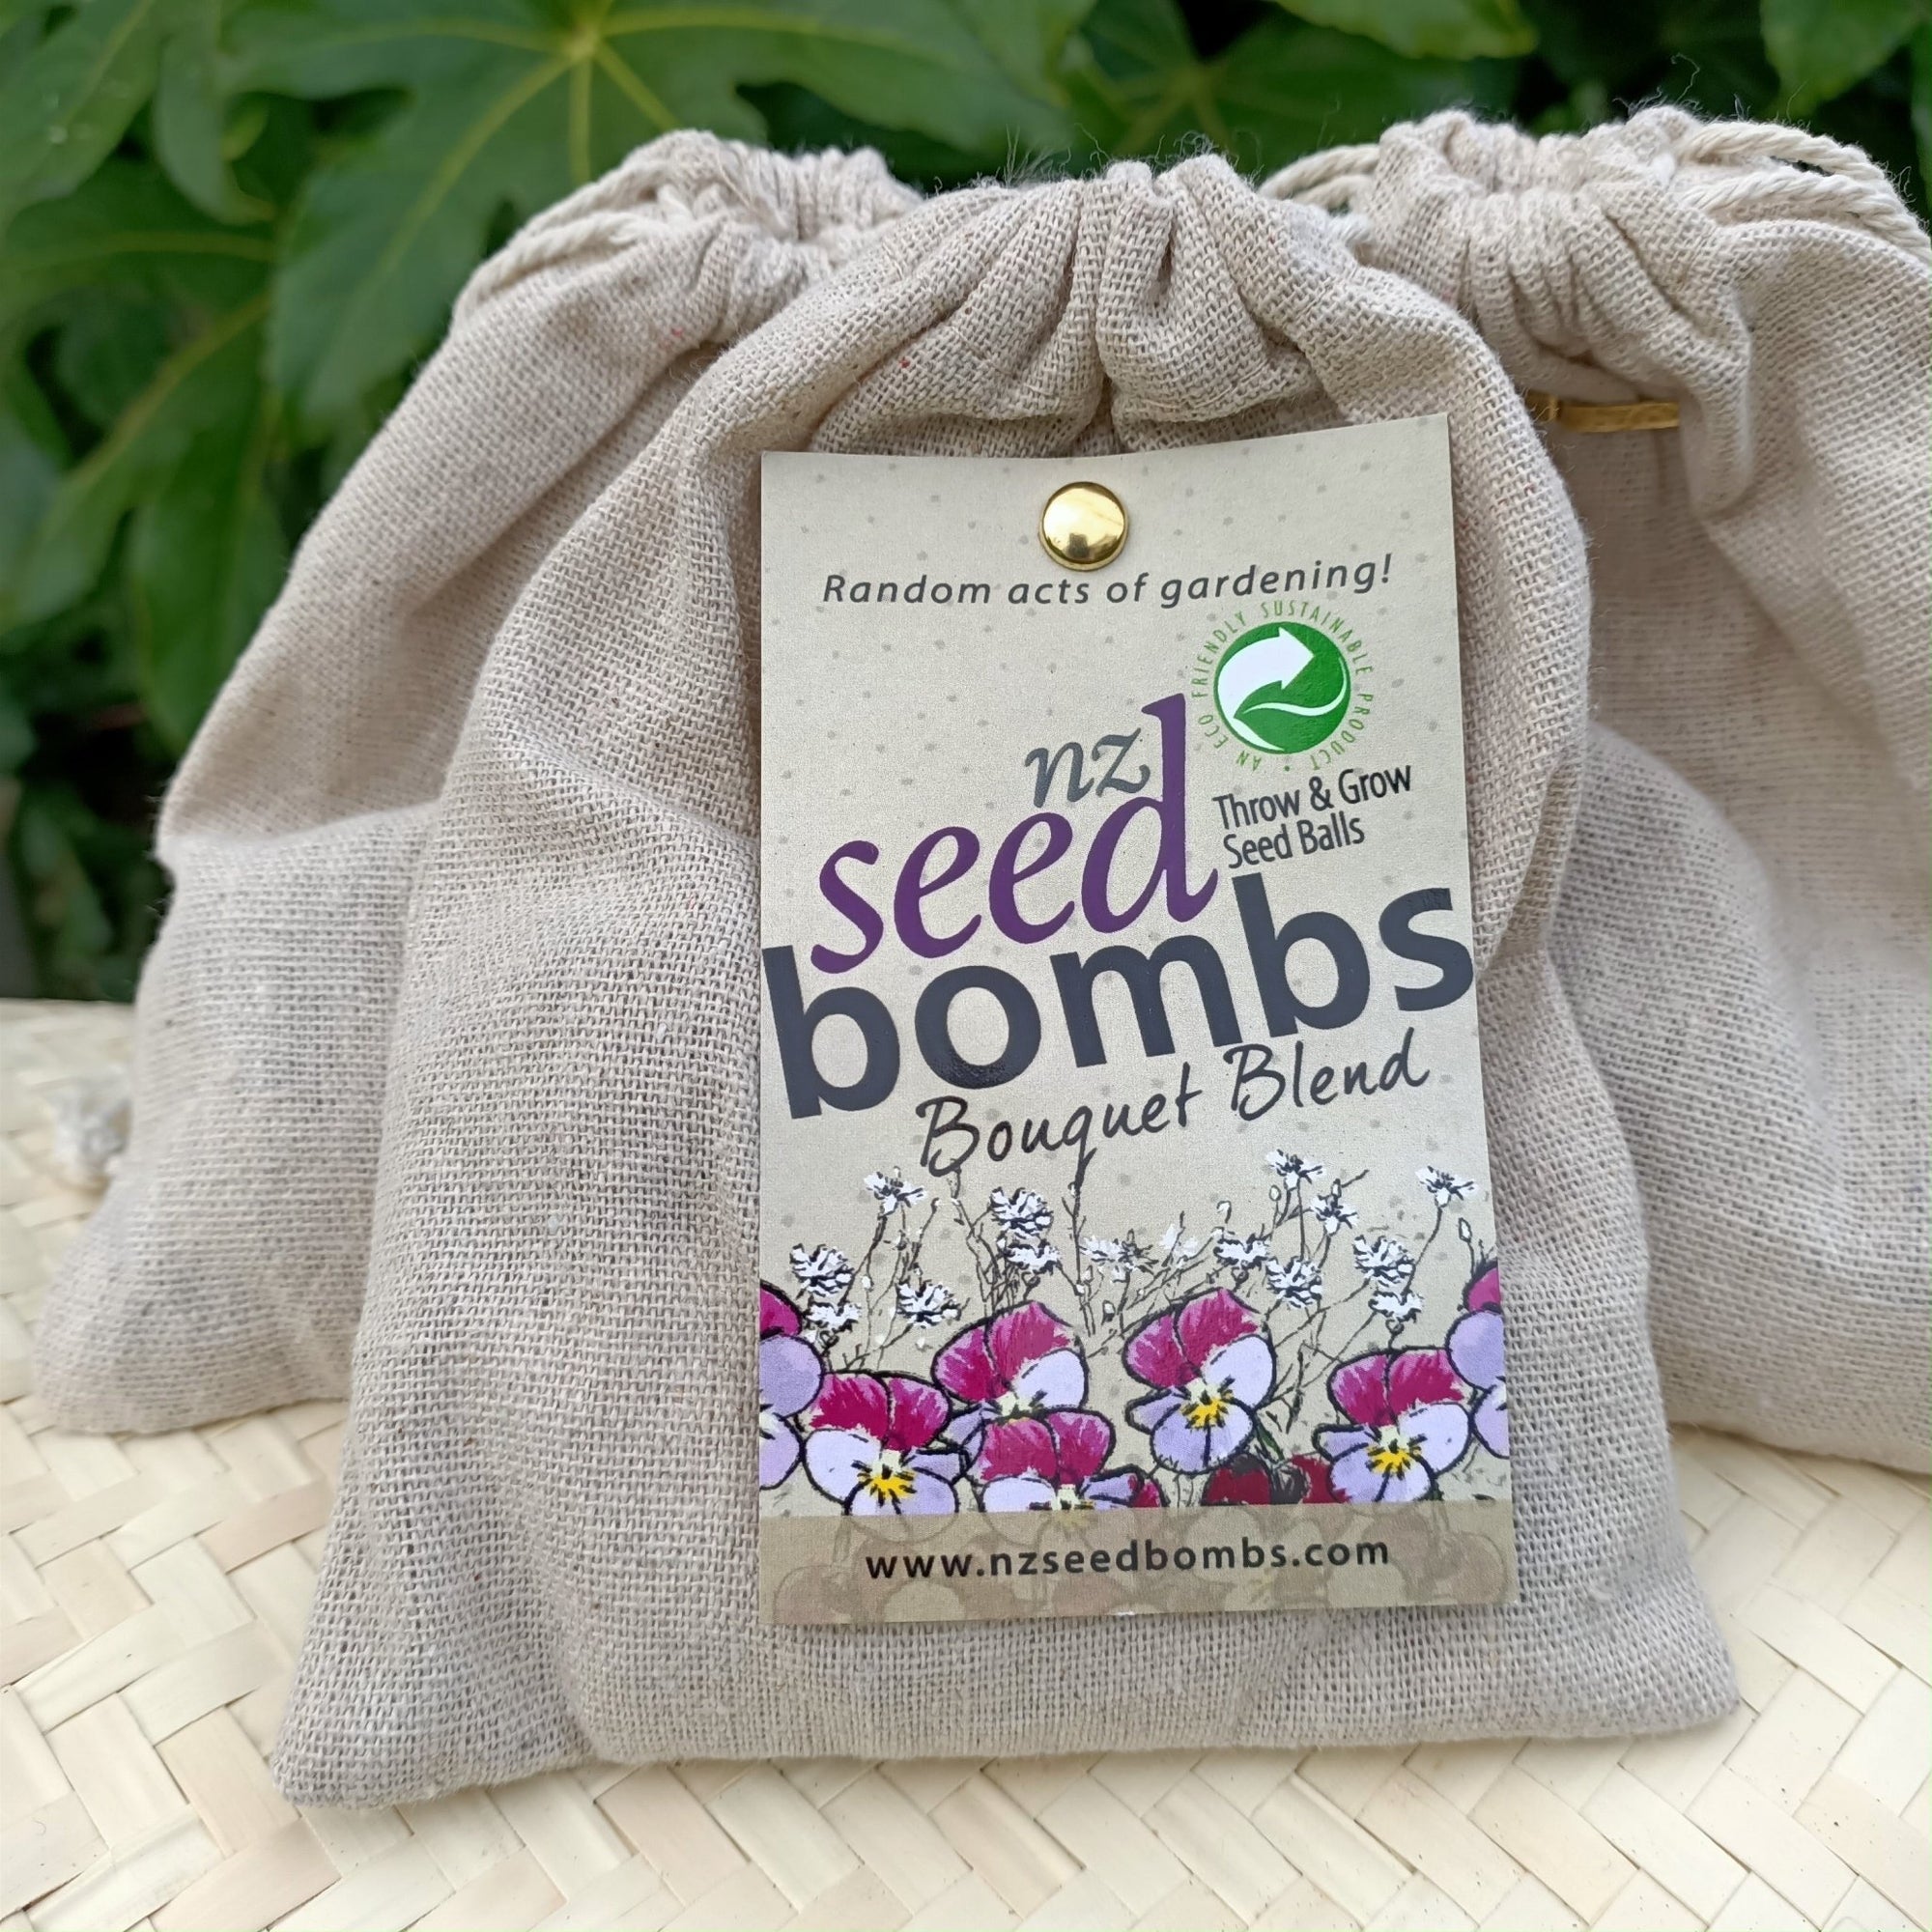 NZ Seed Bombs - Bouquet blend - Beautiful Gifts - Packaged with Love